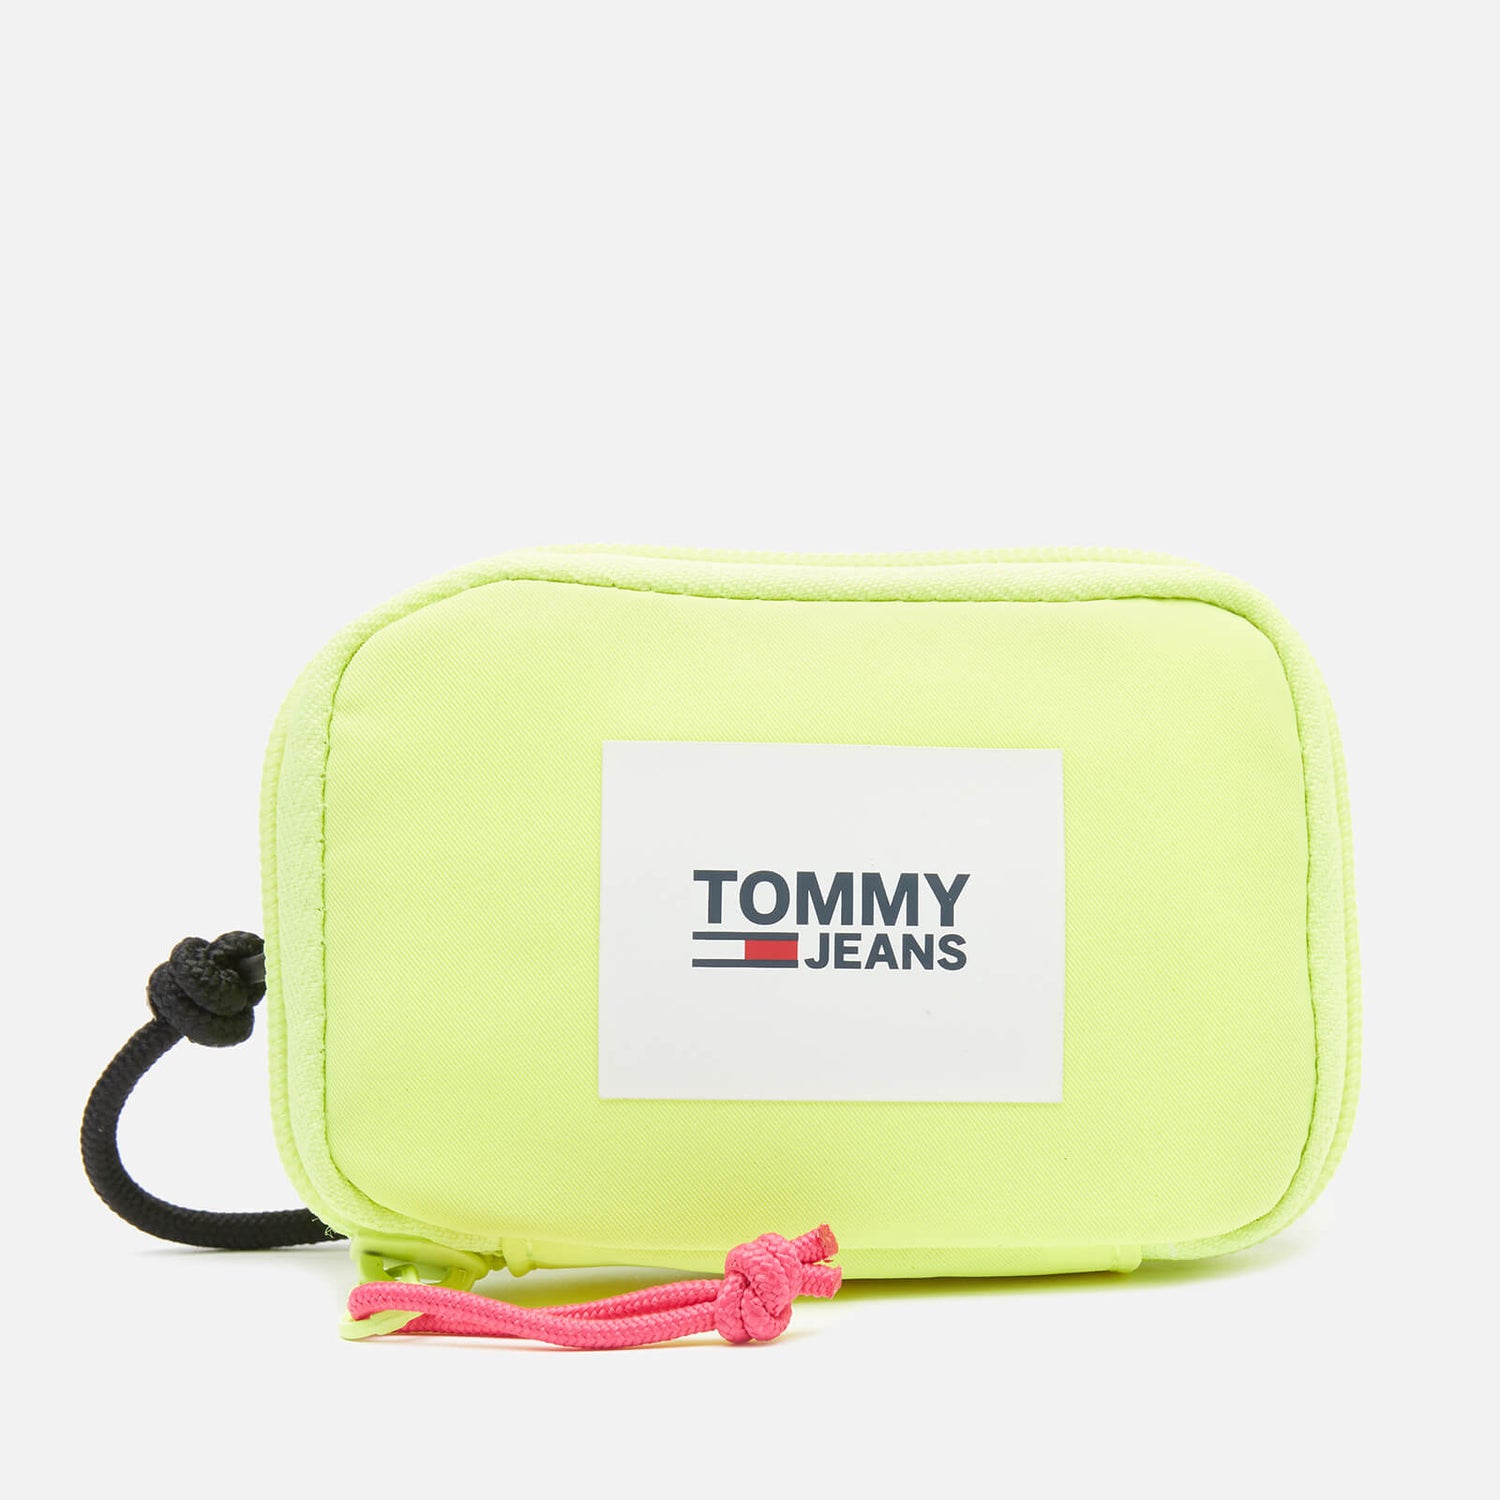 Tommy Jeans Men's Urban Hanging Pouch - Hyper Yellow